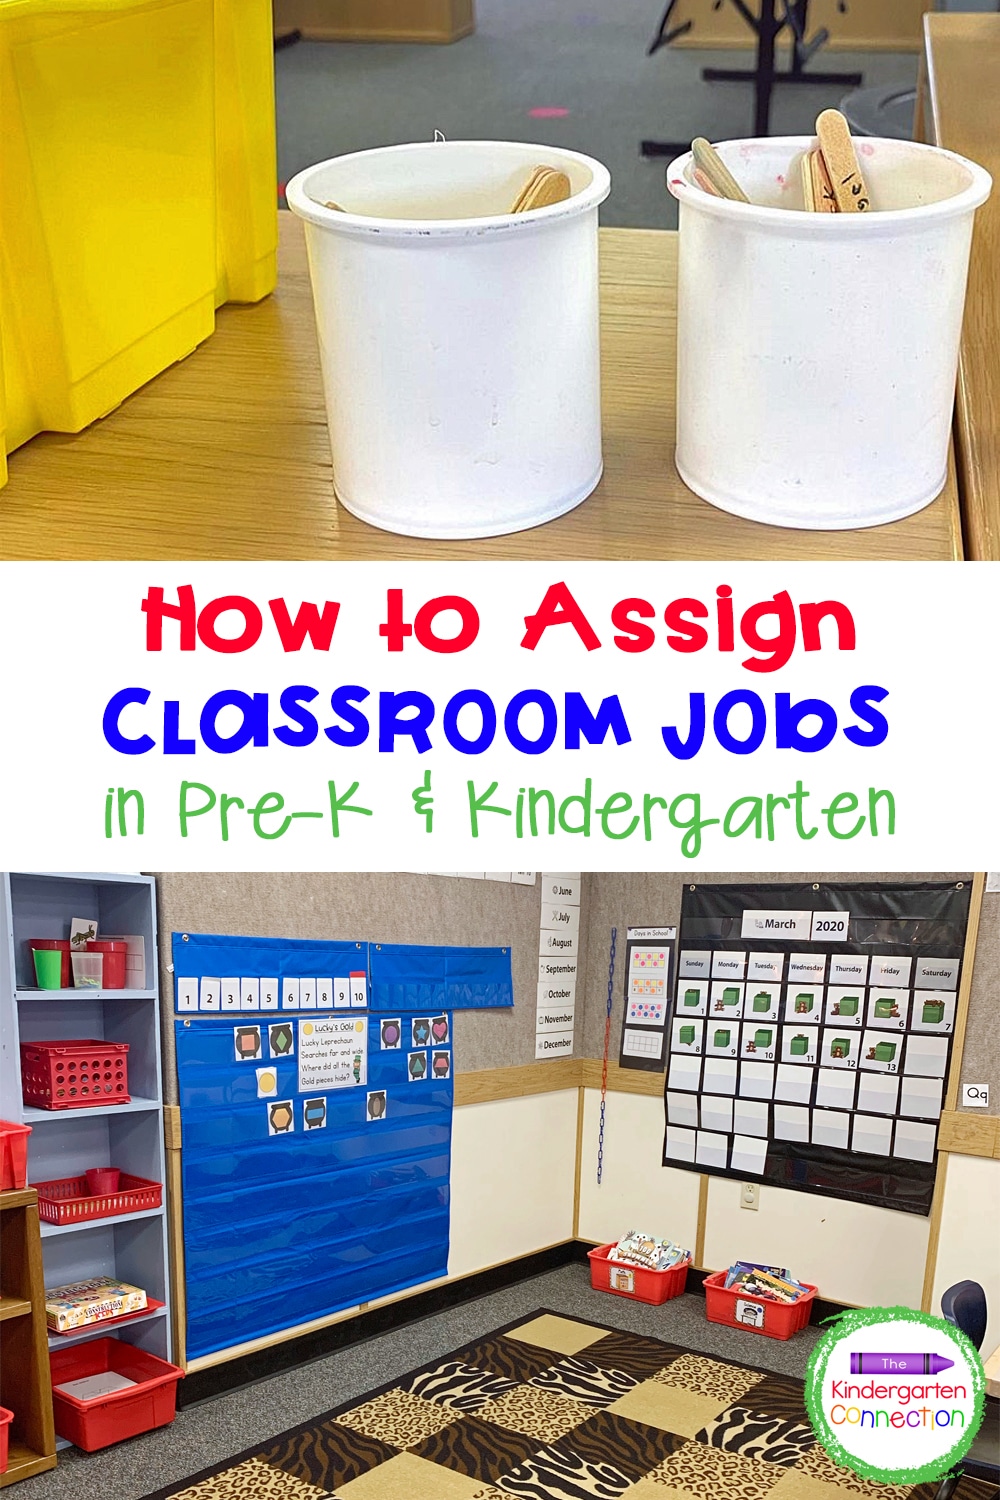 Stress less and check out this teacher tip for assigning classroom jobs in Pre-K & Kindergarten without losing teaching time!